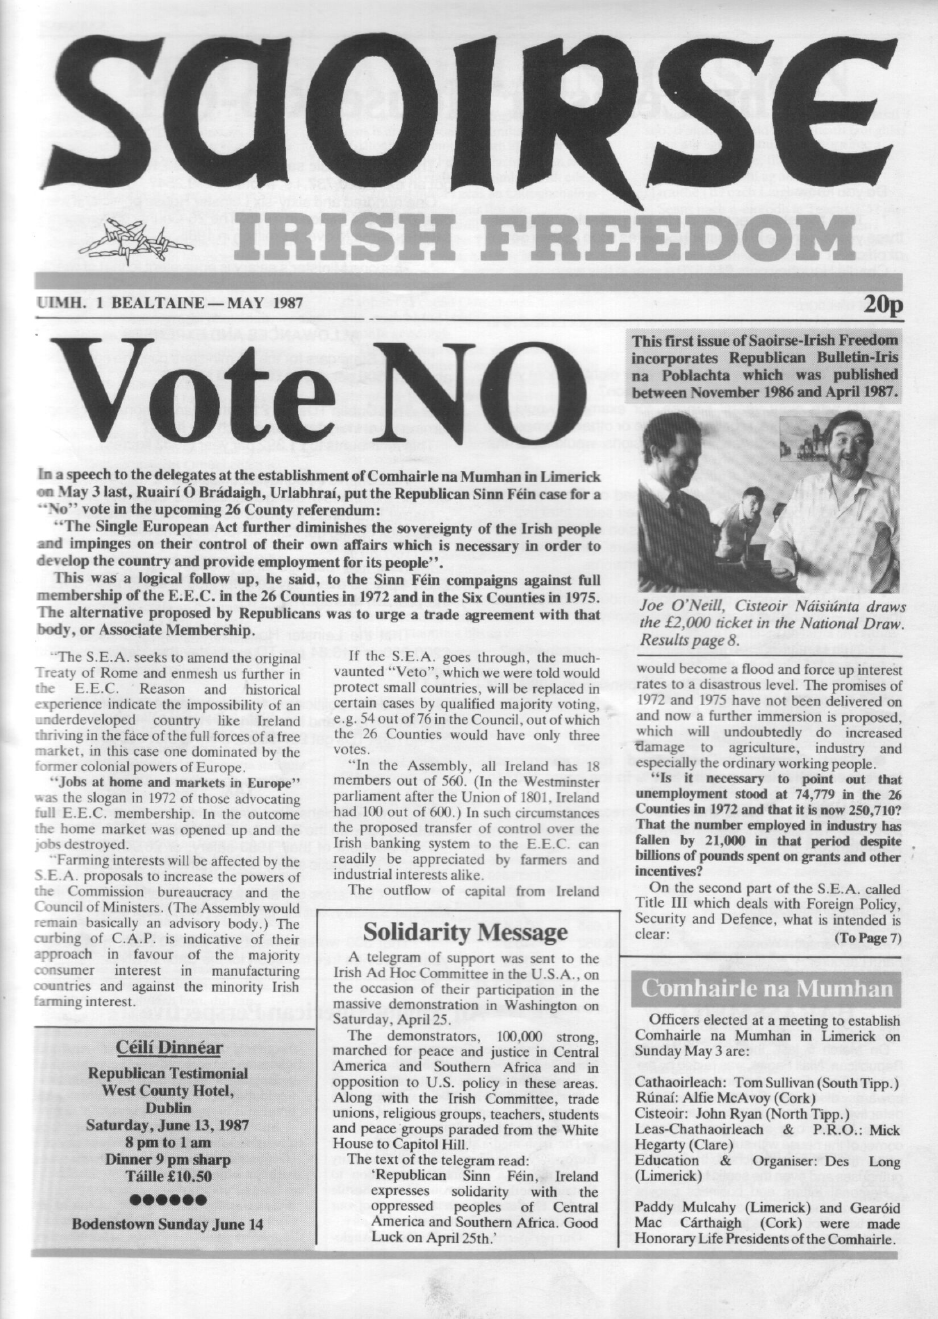 Front page of Saoirse / Irish Freedom, issue no. 1, from Republican Sinn Féin, with the headline "Vote No"